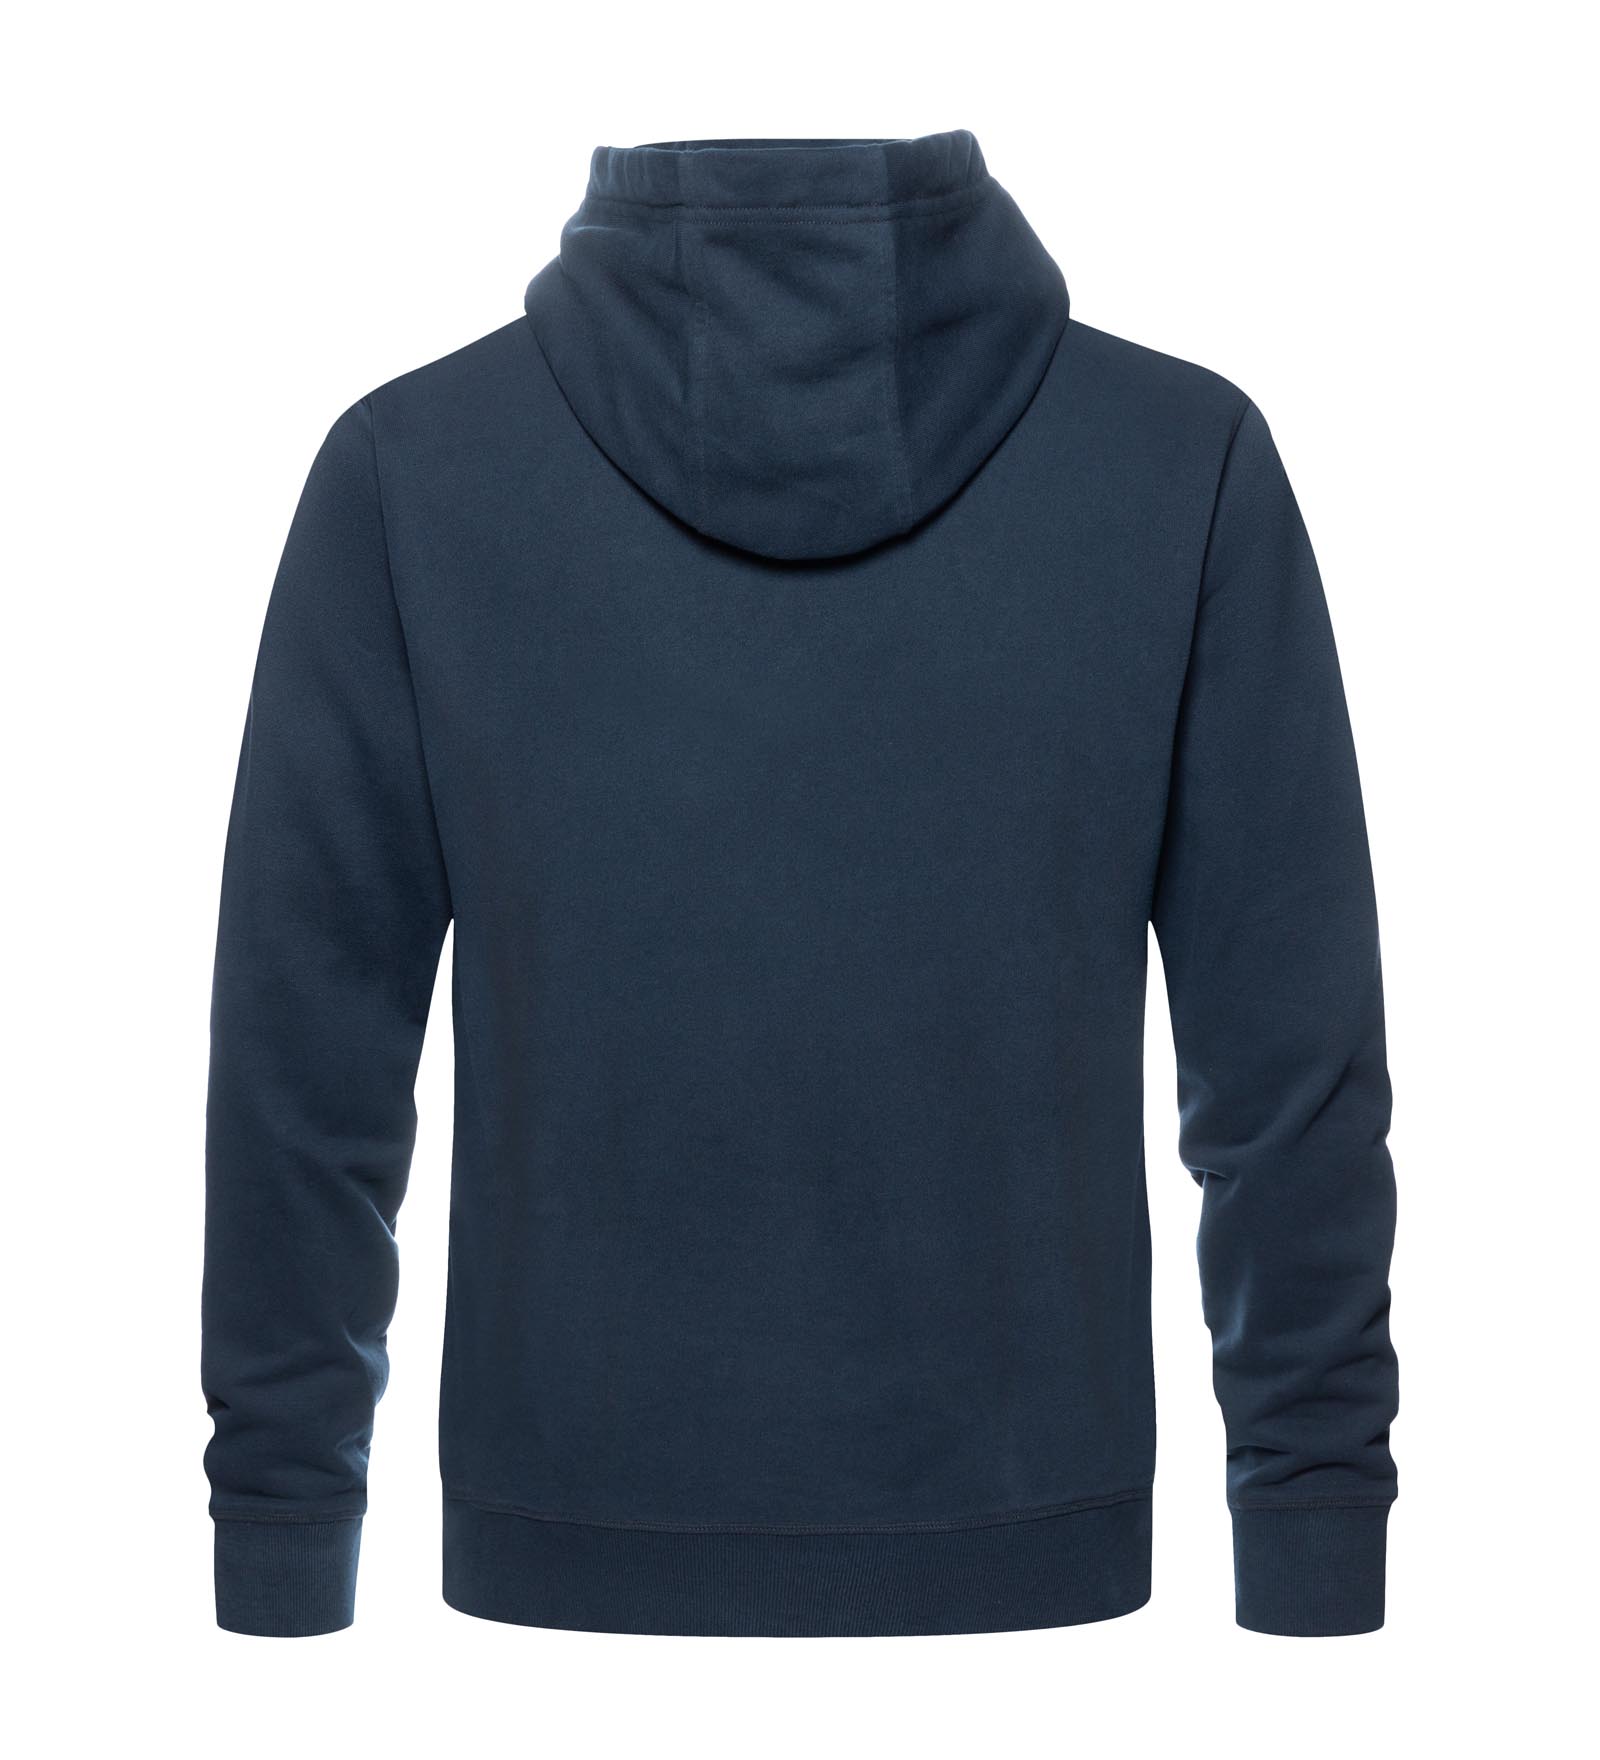 Hoodie Navy Blue for Men and Women 